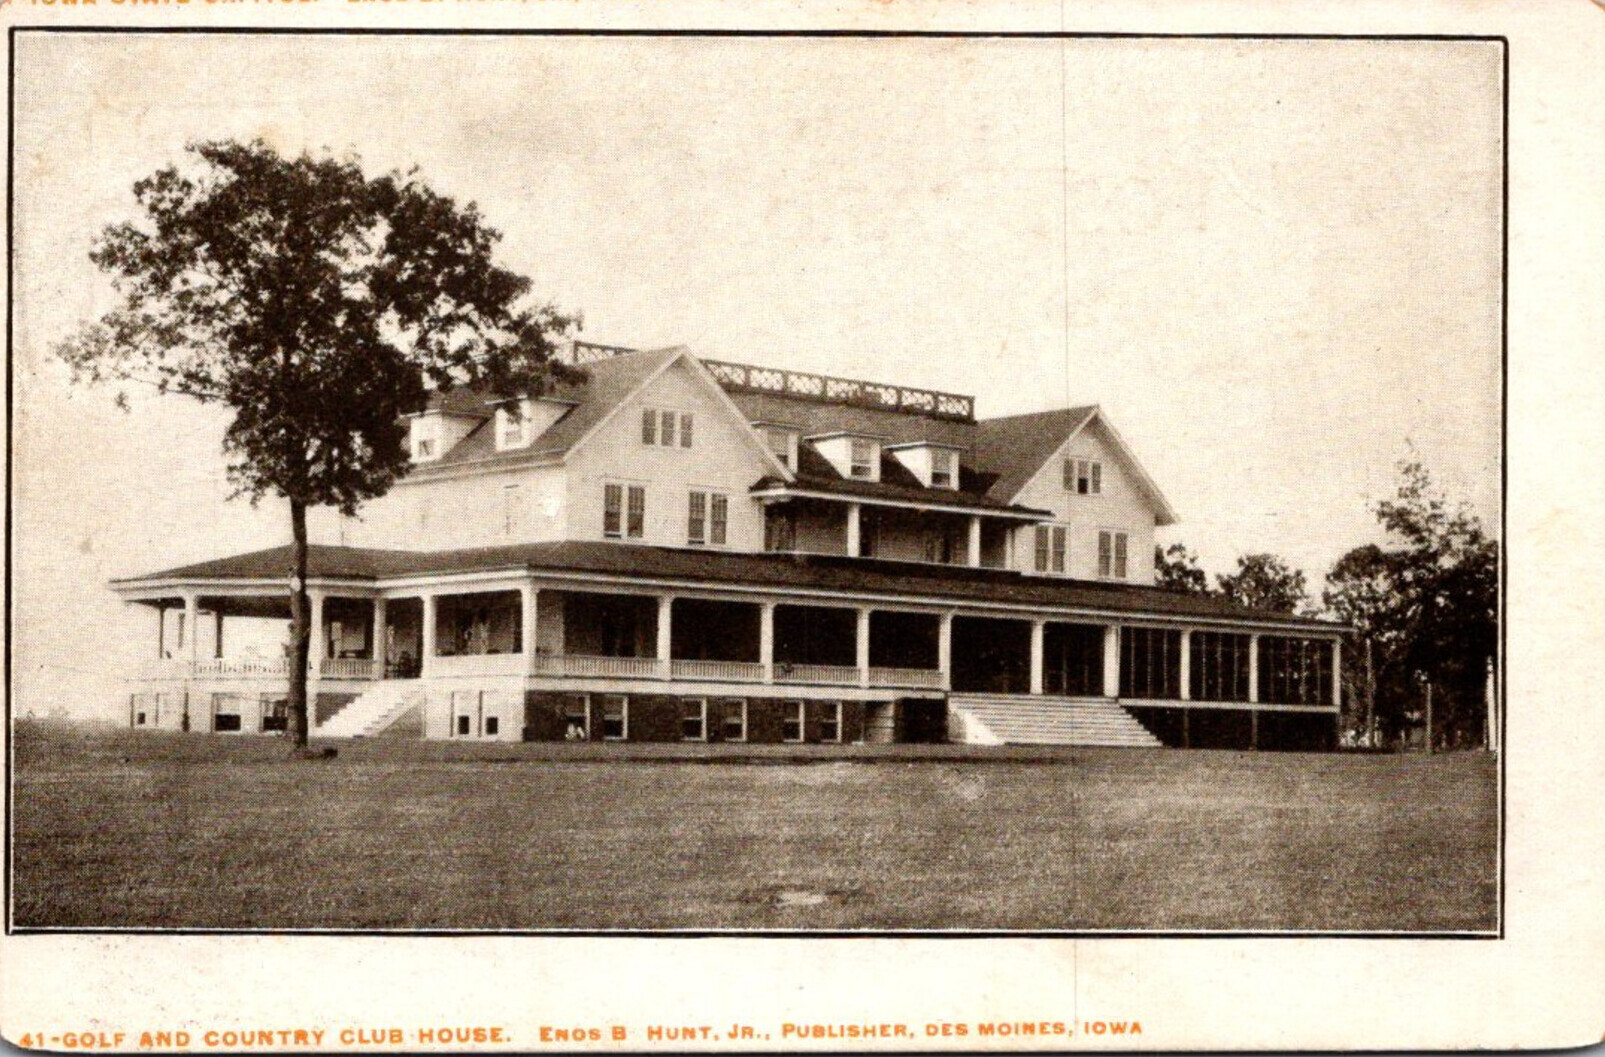 Iowa Des Moines Golf and Country Club House | United States - Iowa - Des  Moines, Postcard / HipPostcard